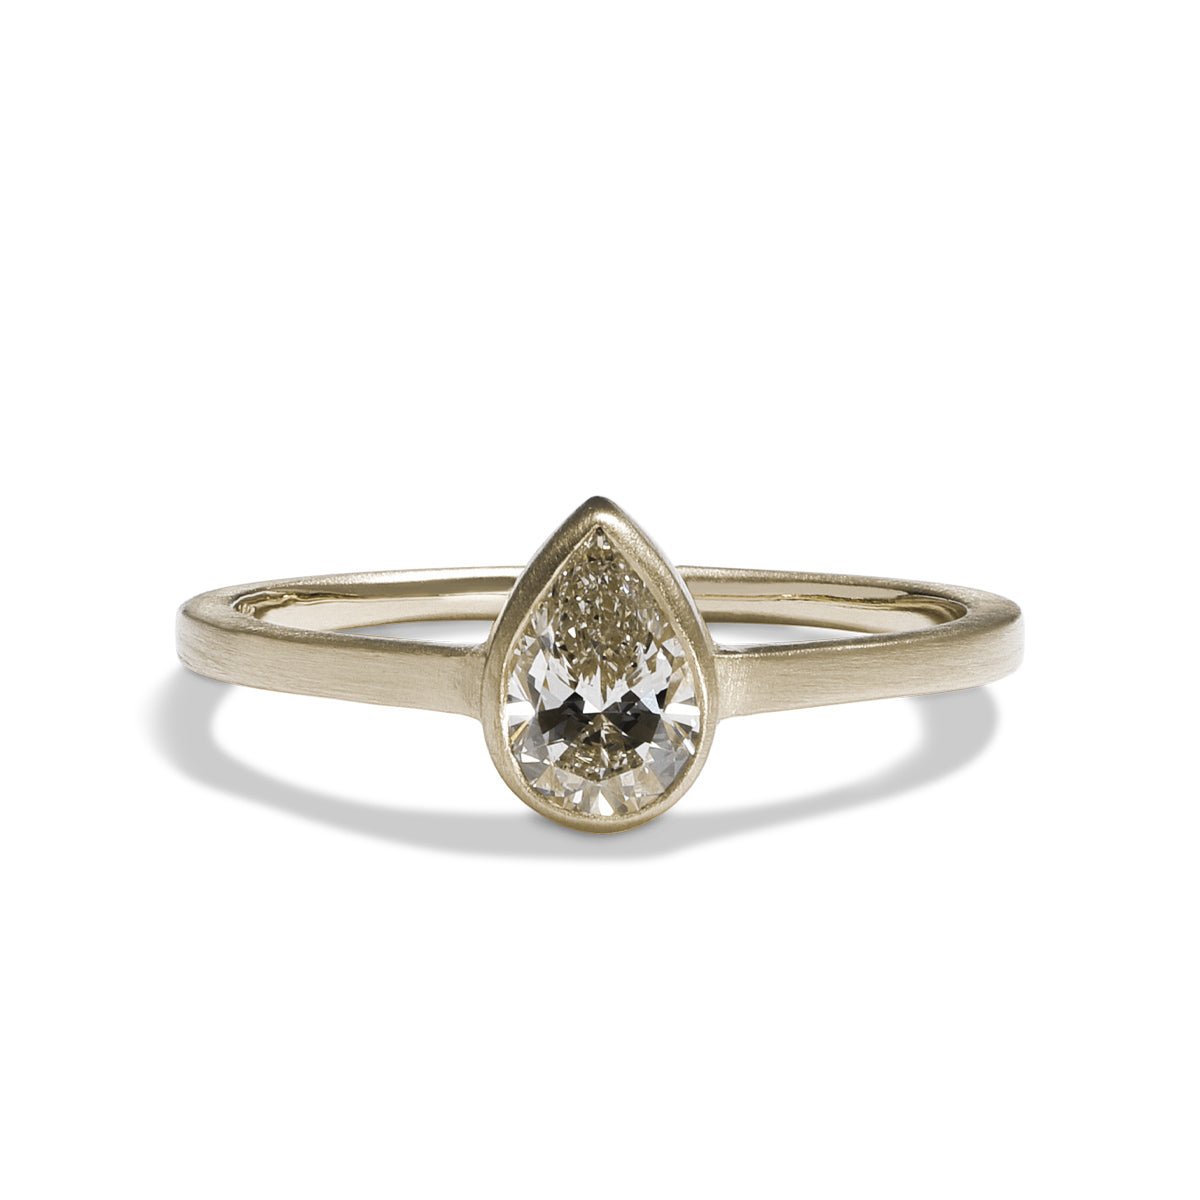 Modern pear shaped Votum ring from Betsy & Iya. With a 14K white gold band and lab-grown diamond (0.5 ct).